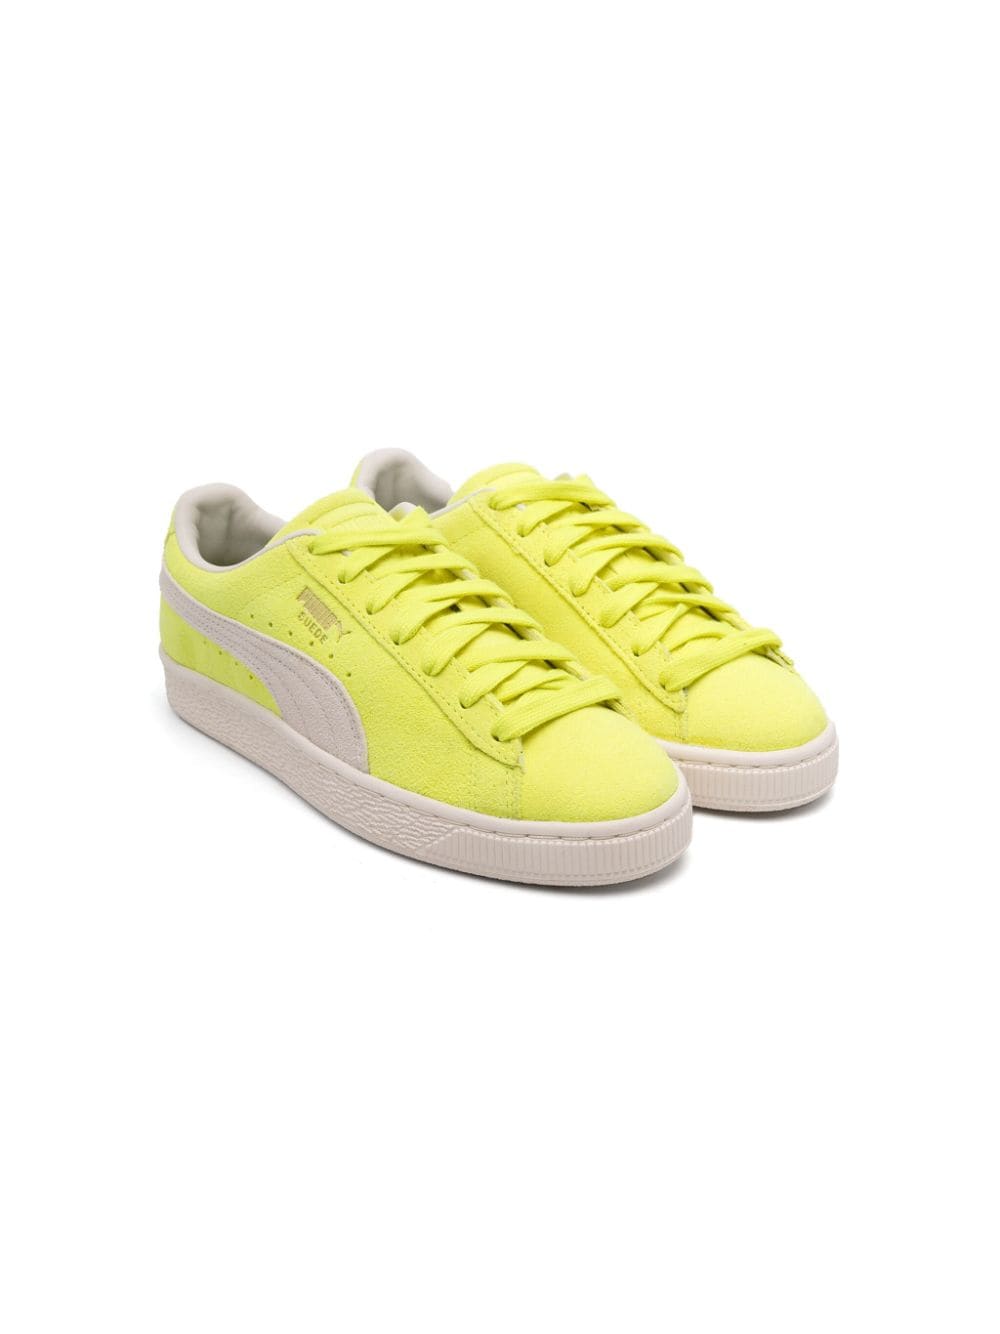 Puma Kids' Formstrip Suede Trainers In Yellow